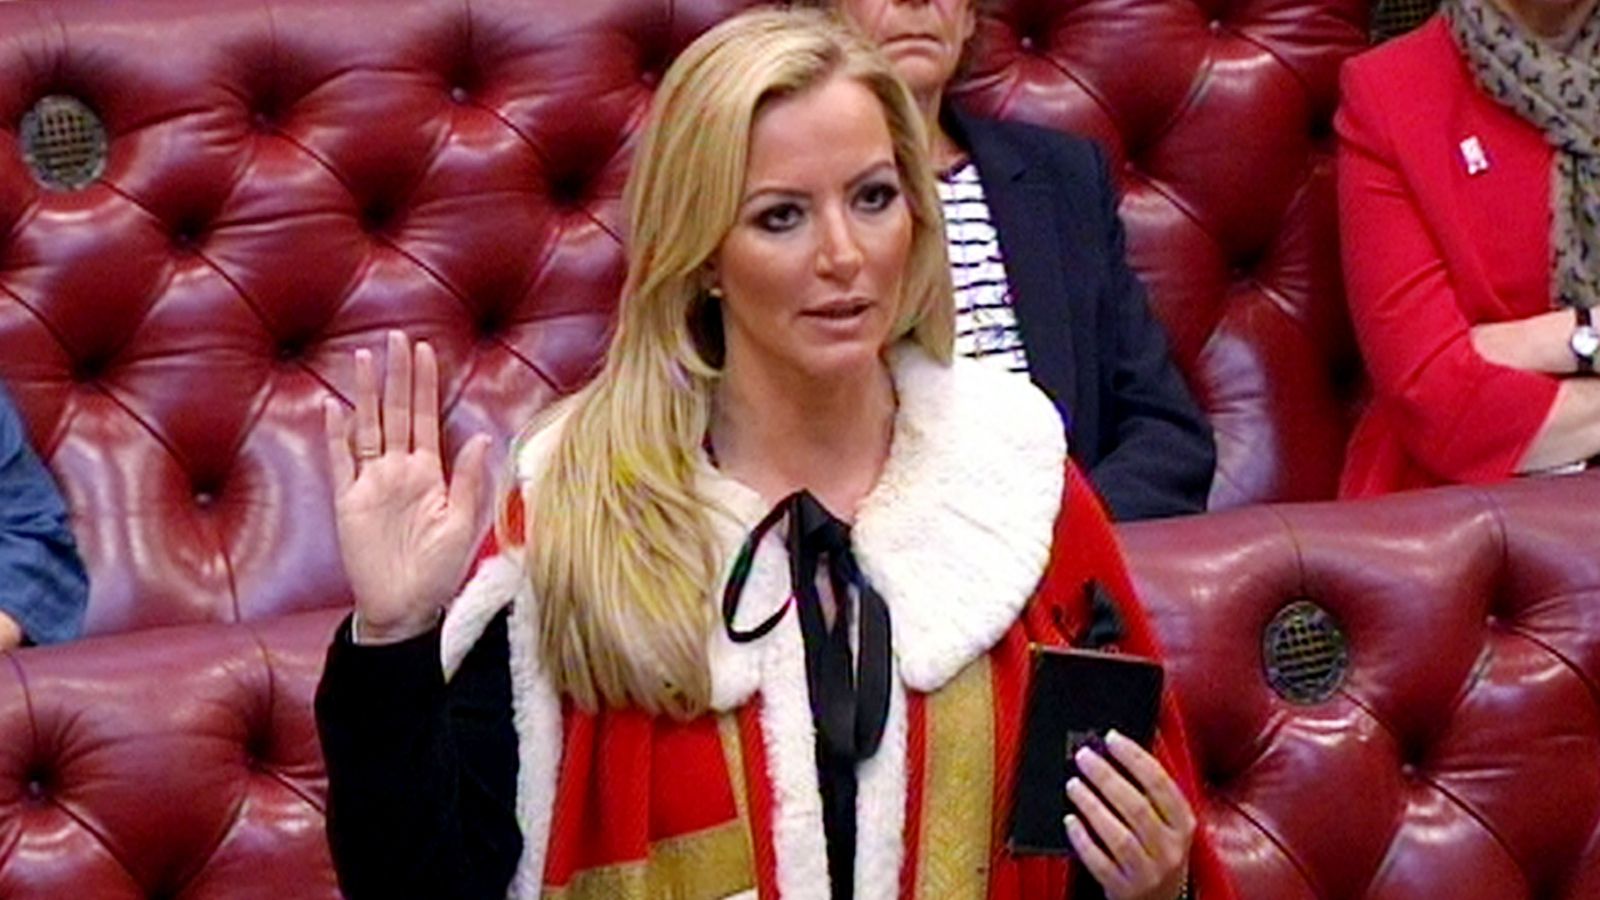 Labour demands Gove answers questions over Michelle Mone PPE controversy